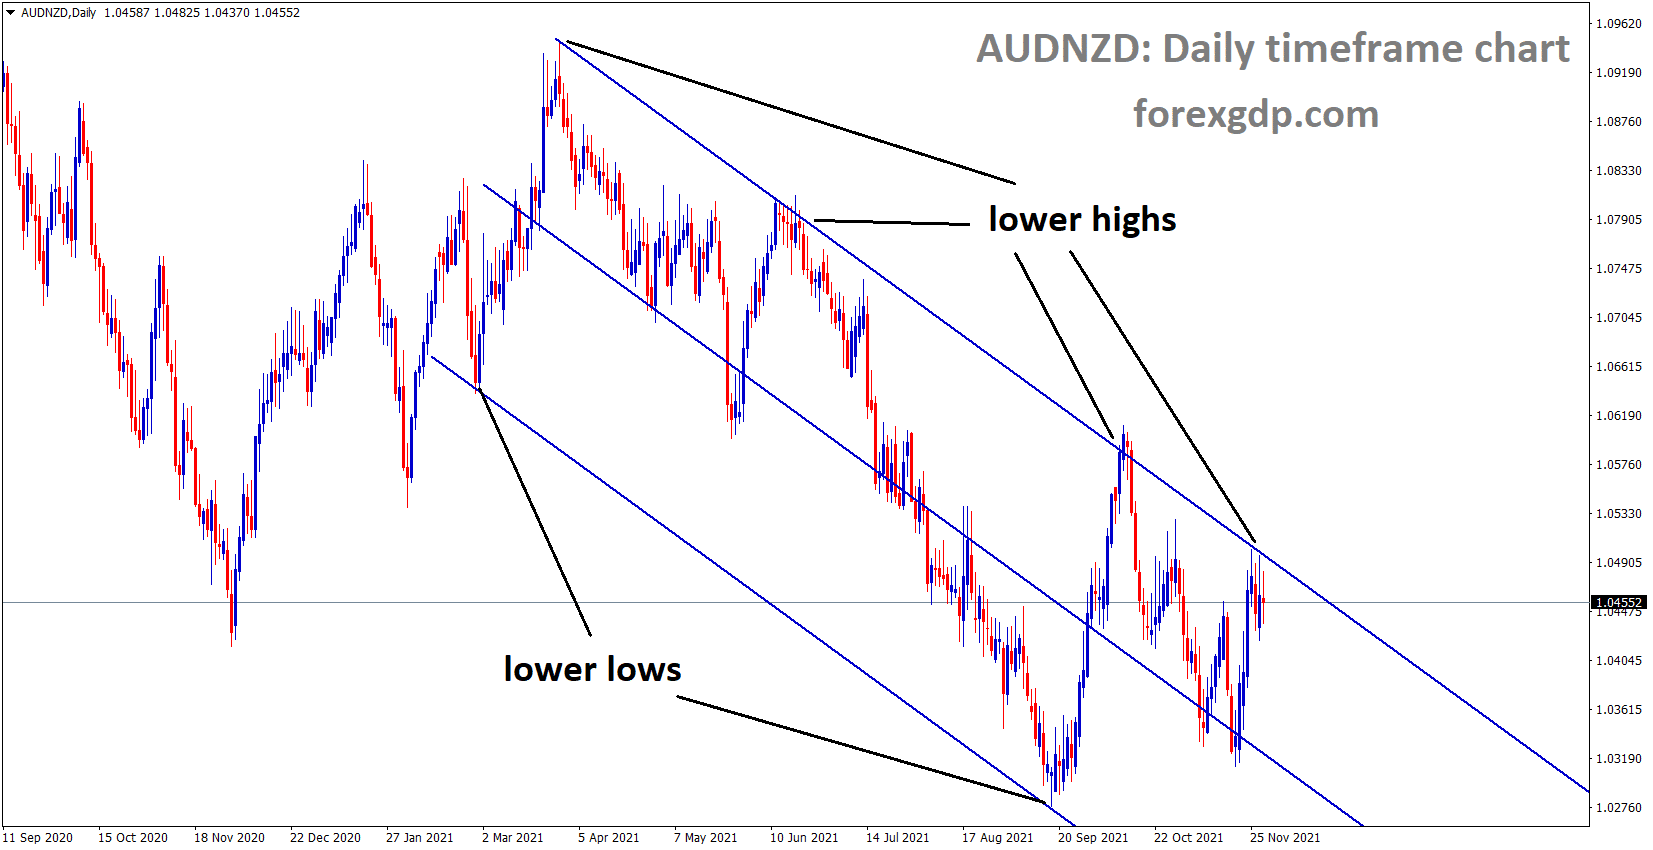 AUDNZD is moving in the Descending channel and market reached and consolidation at the lower high area of the channel